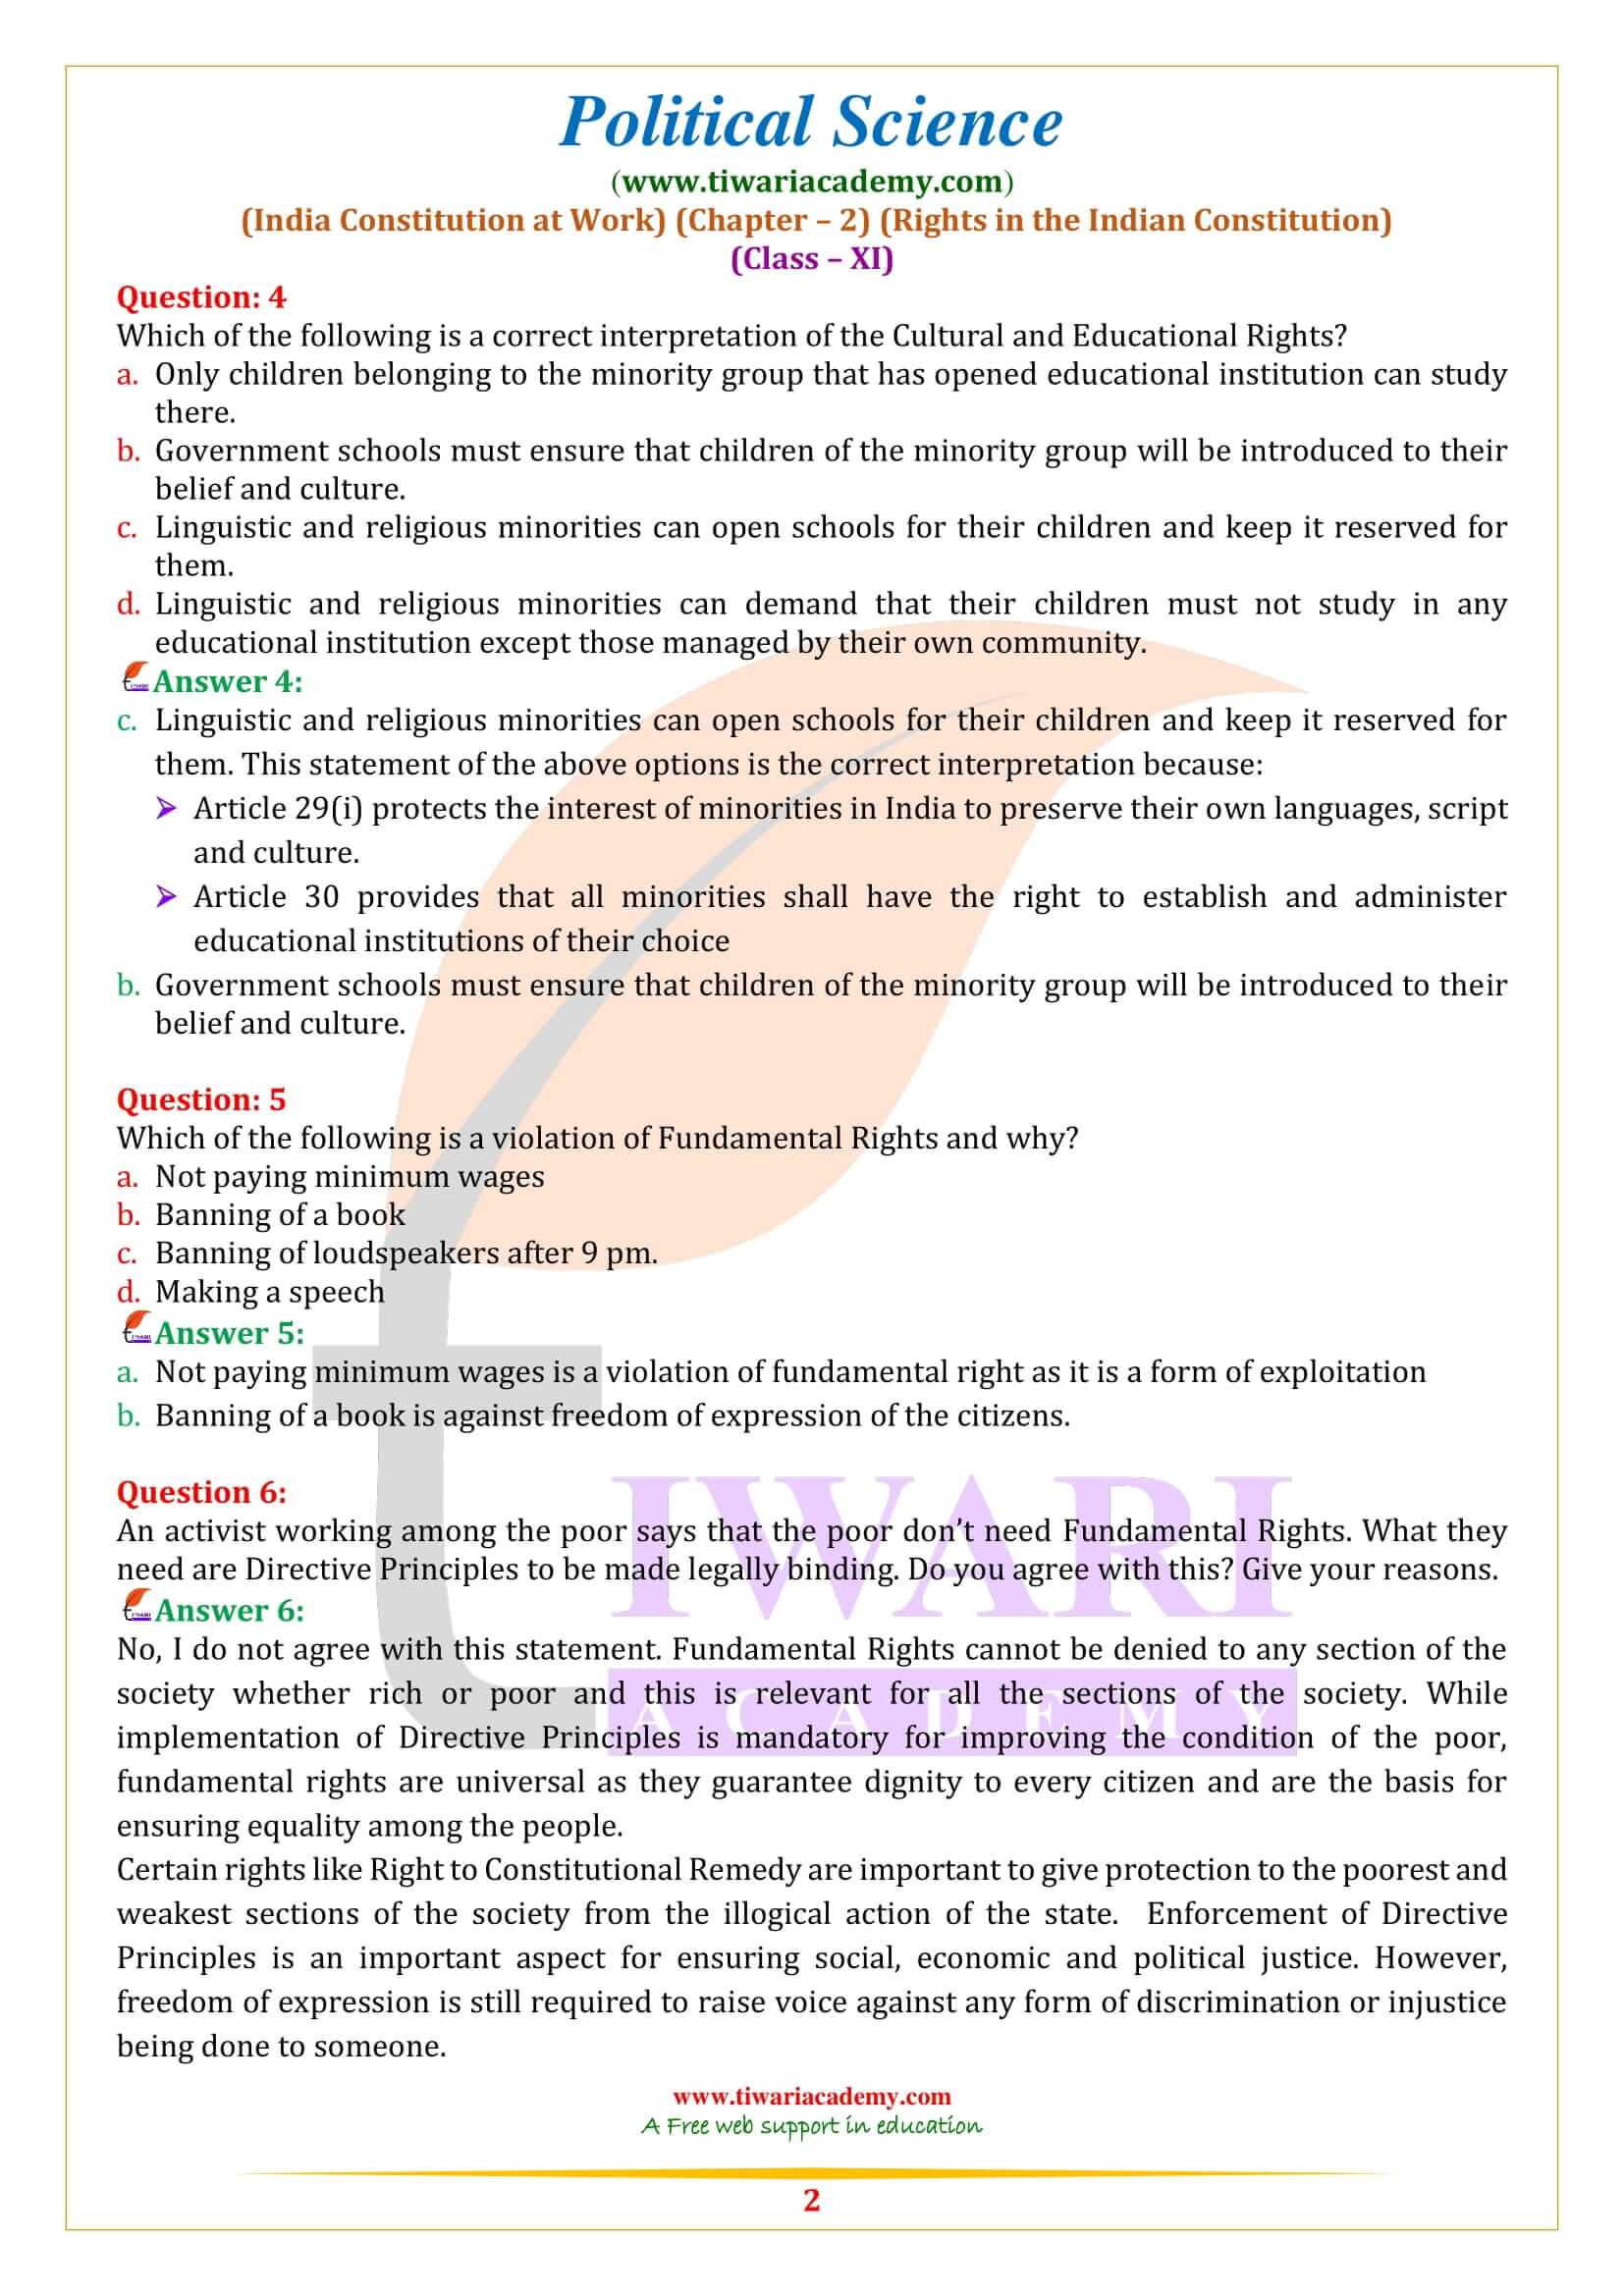 NCERT Solutions for Class 11 Political Science Chapter 2